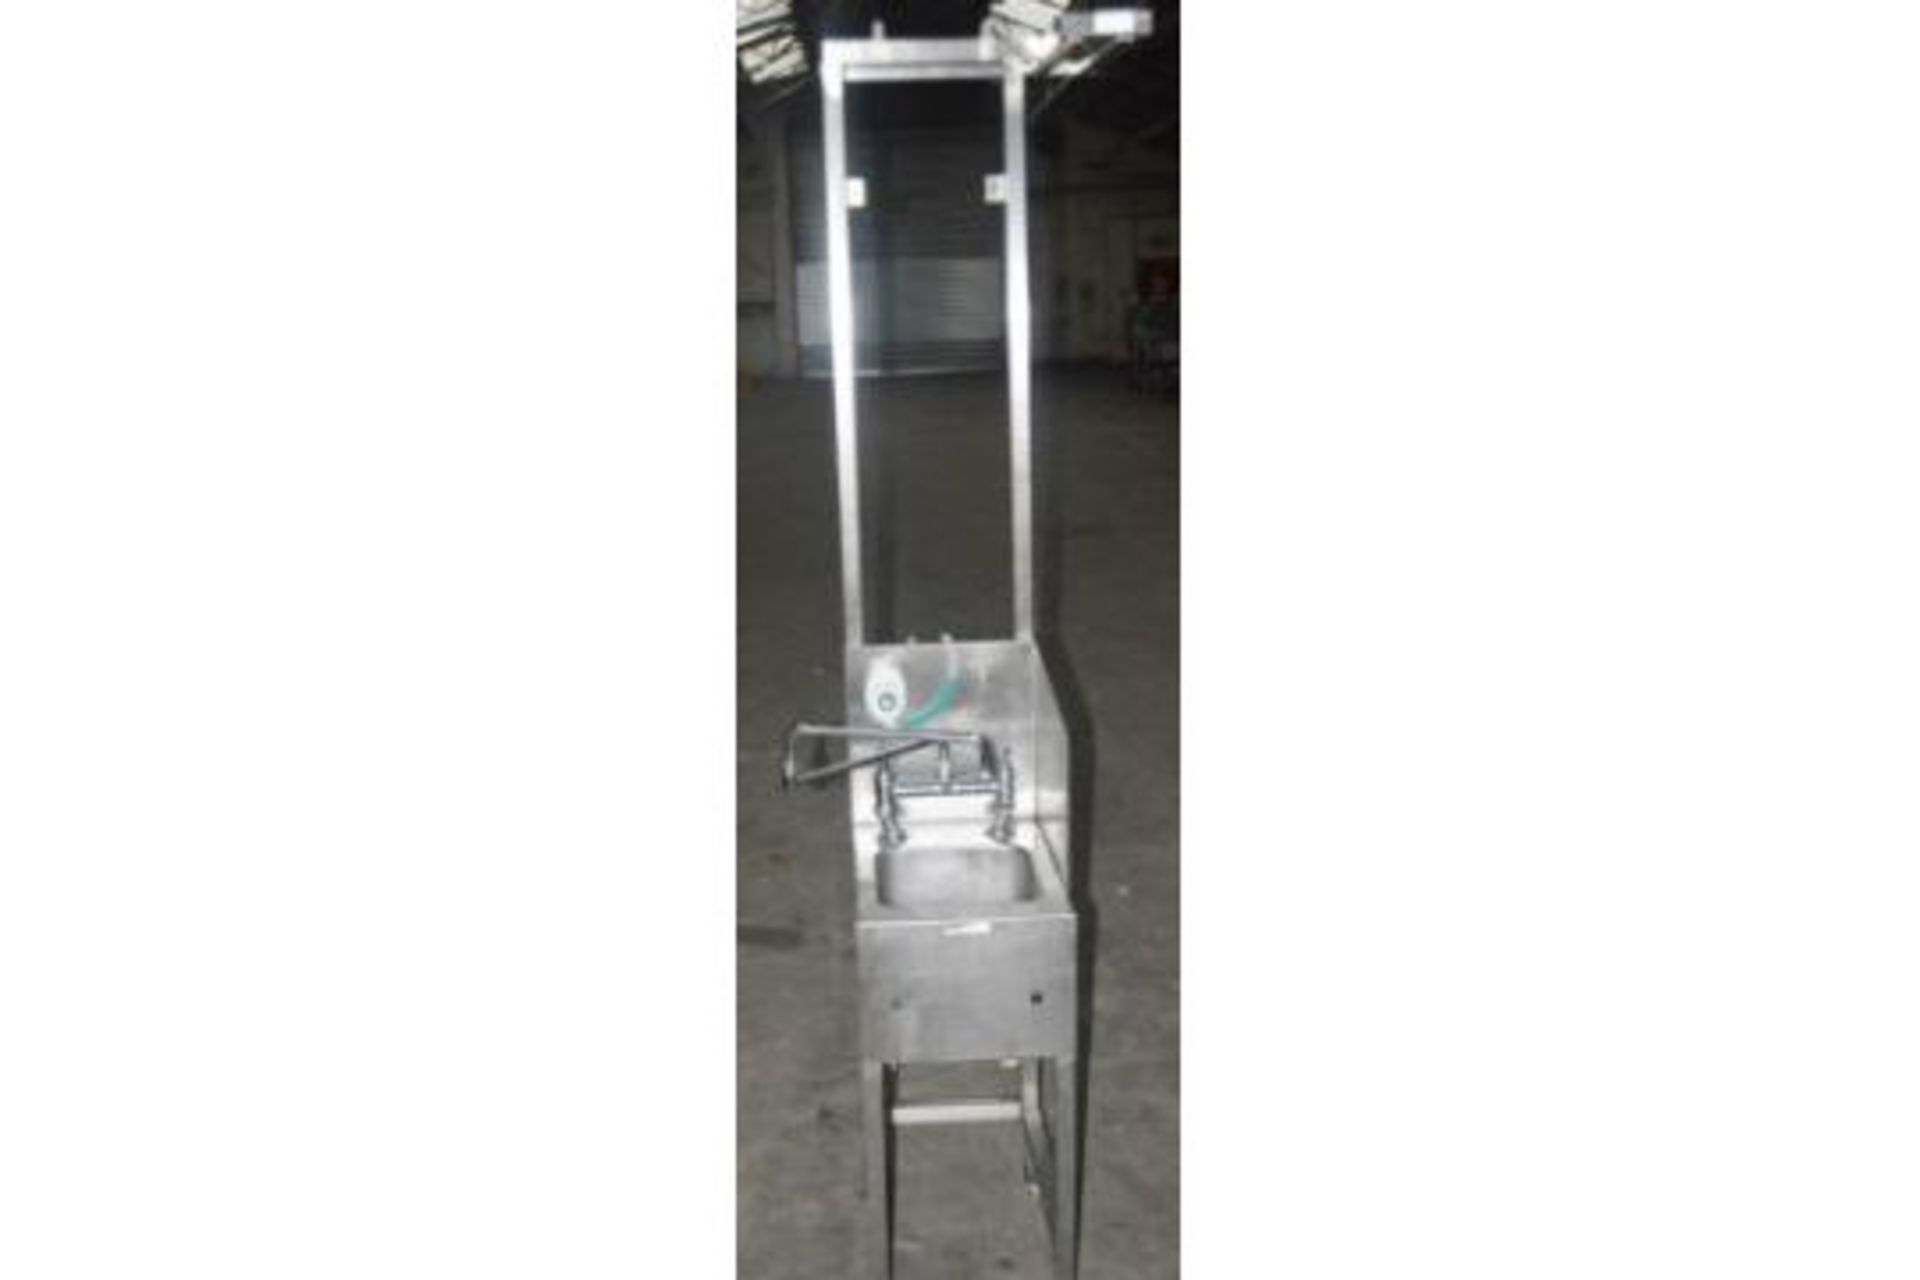 1 x Stainless Steel Commercial Kitchen Janitorial Mop / Cleaning Station - Dimensions: H187 x W33 - Image 4 of 8